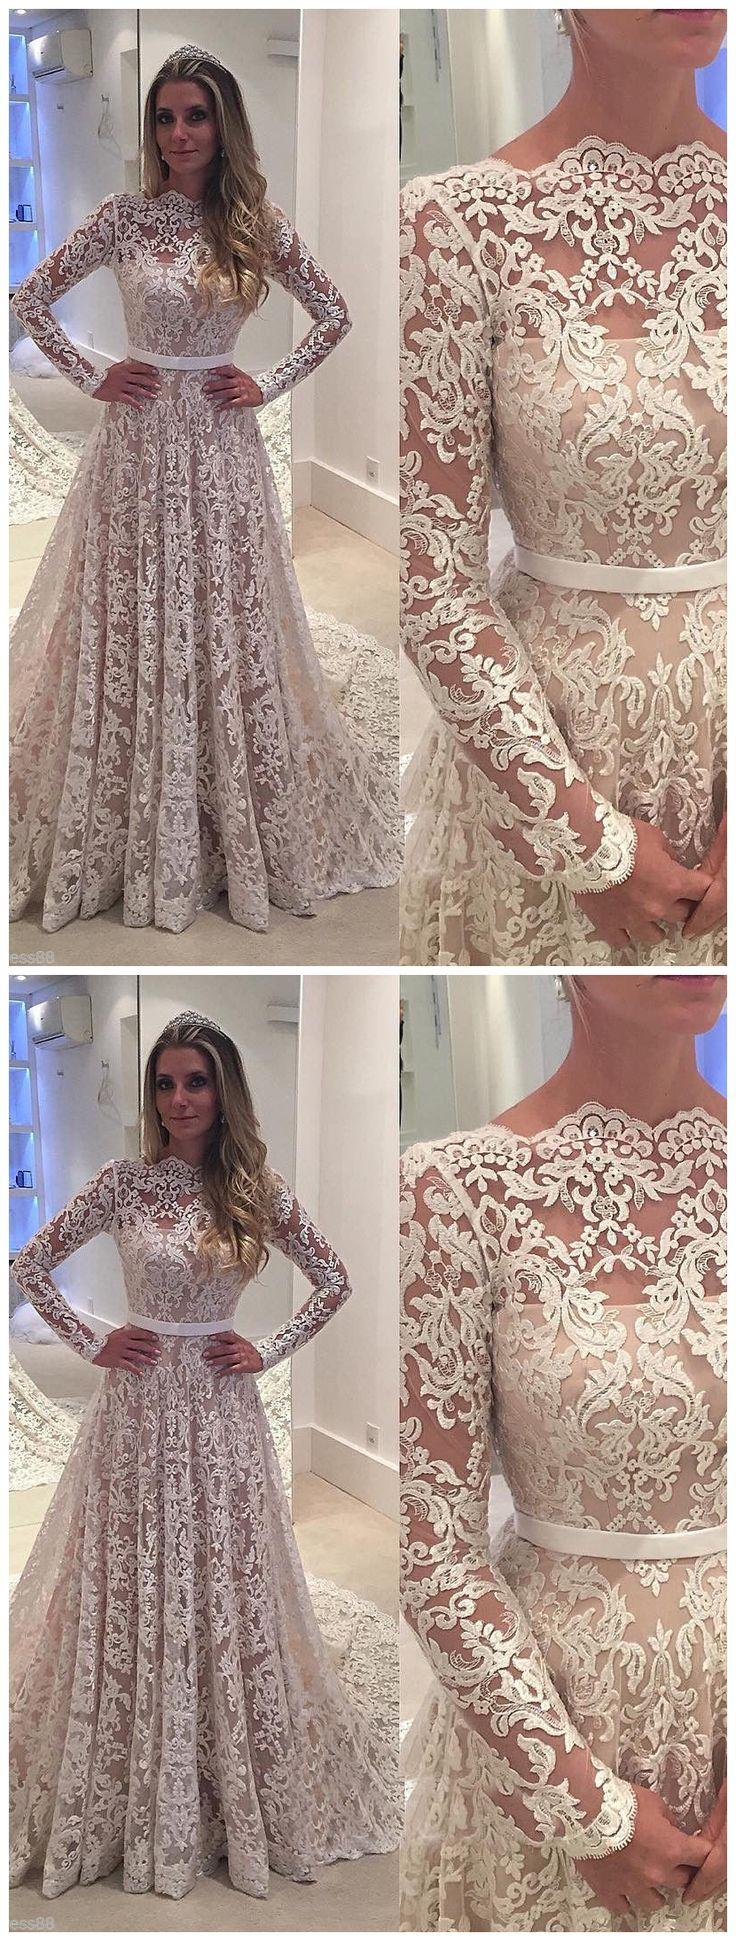 Mariage - Chapel Train Vintage Lace Wedding Dresses Long Sleeves Wedding Gown Apd2174